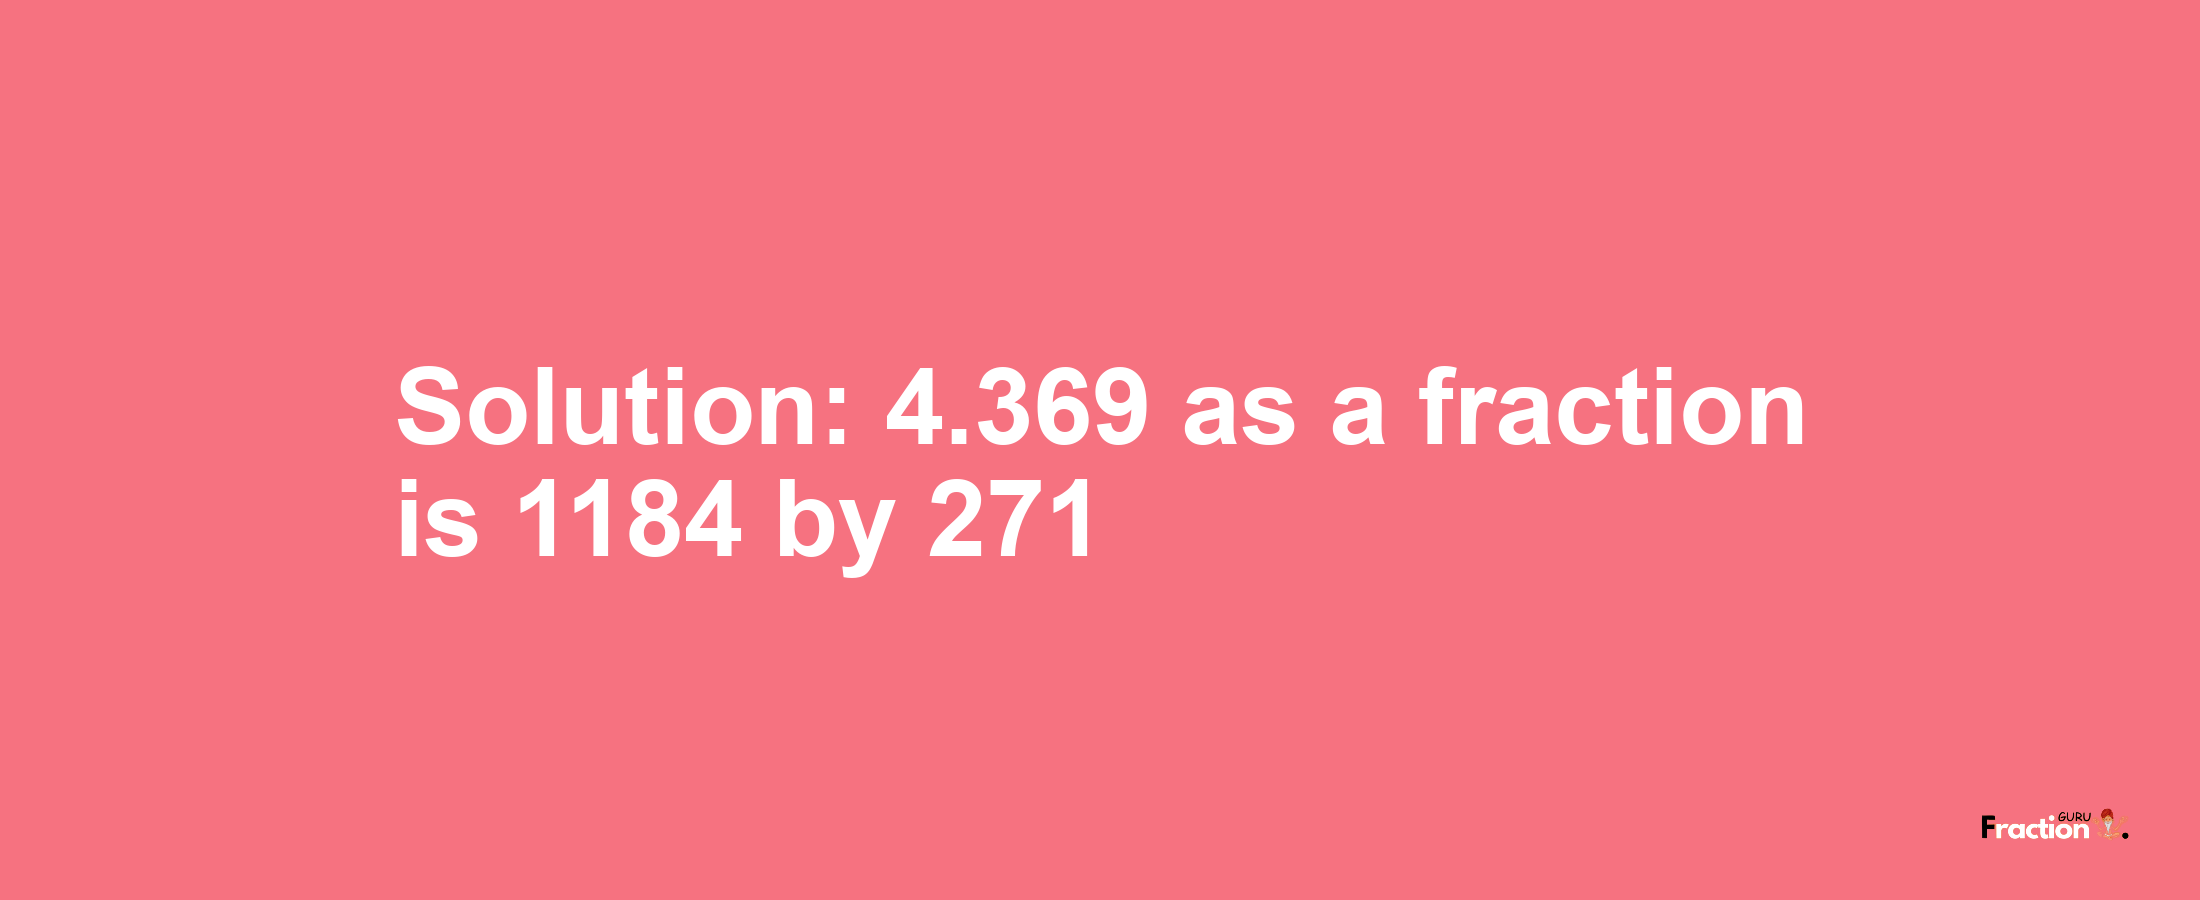 Solution:4.369 as a fraction is 1184/271